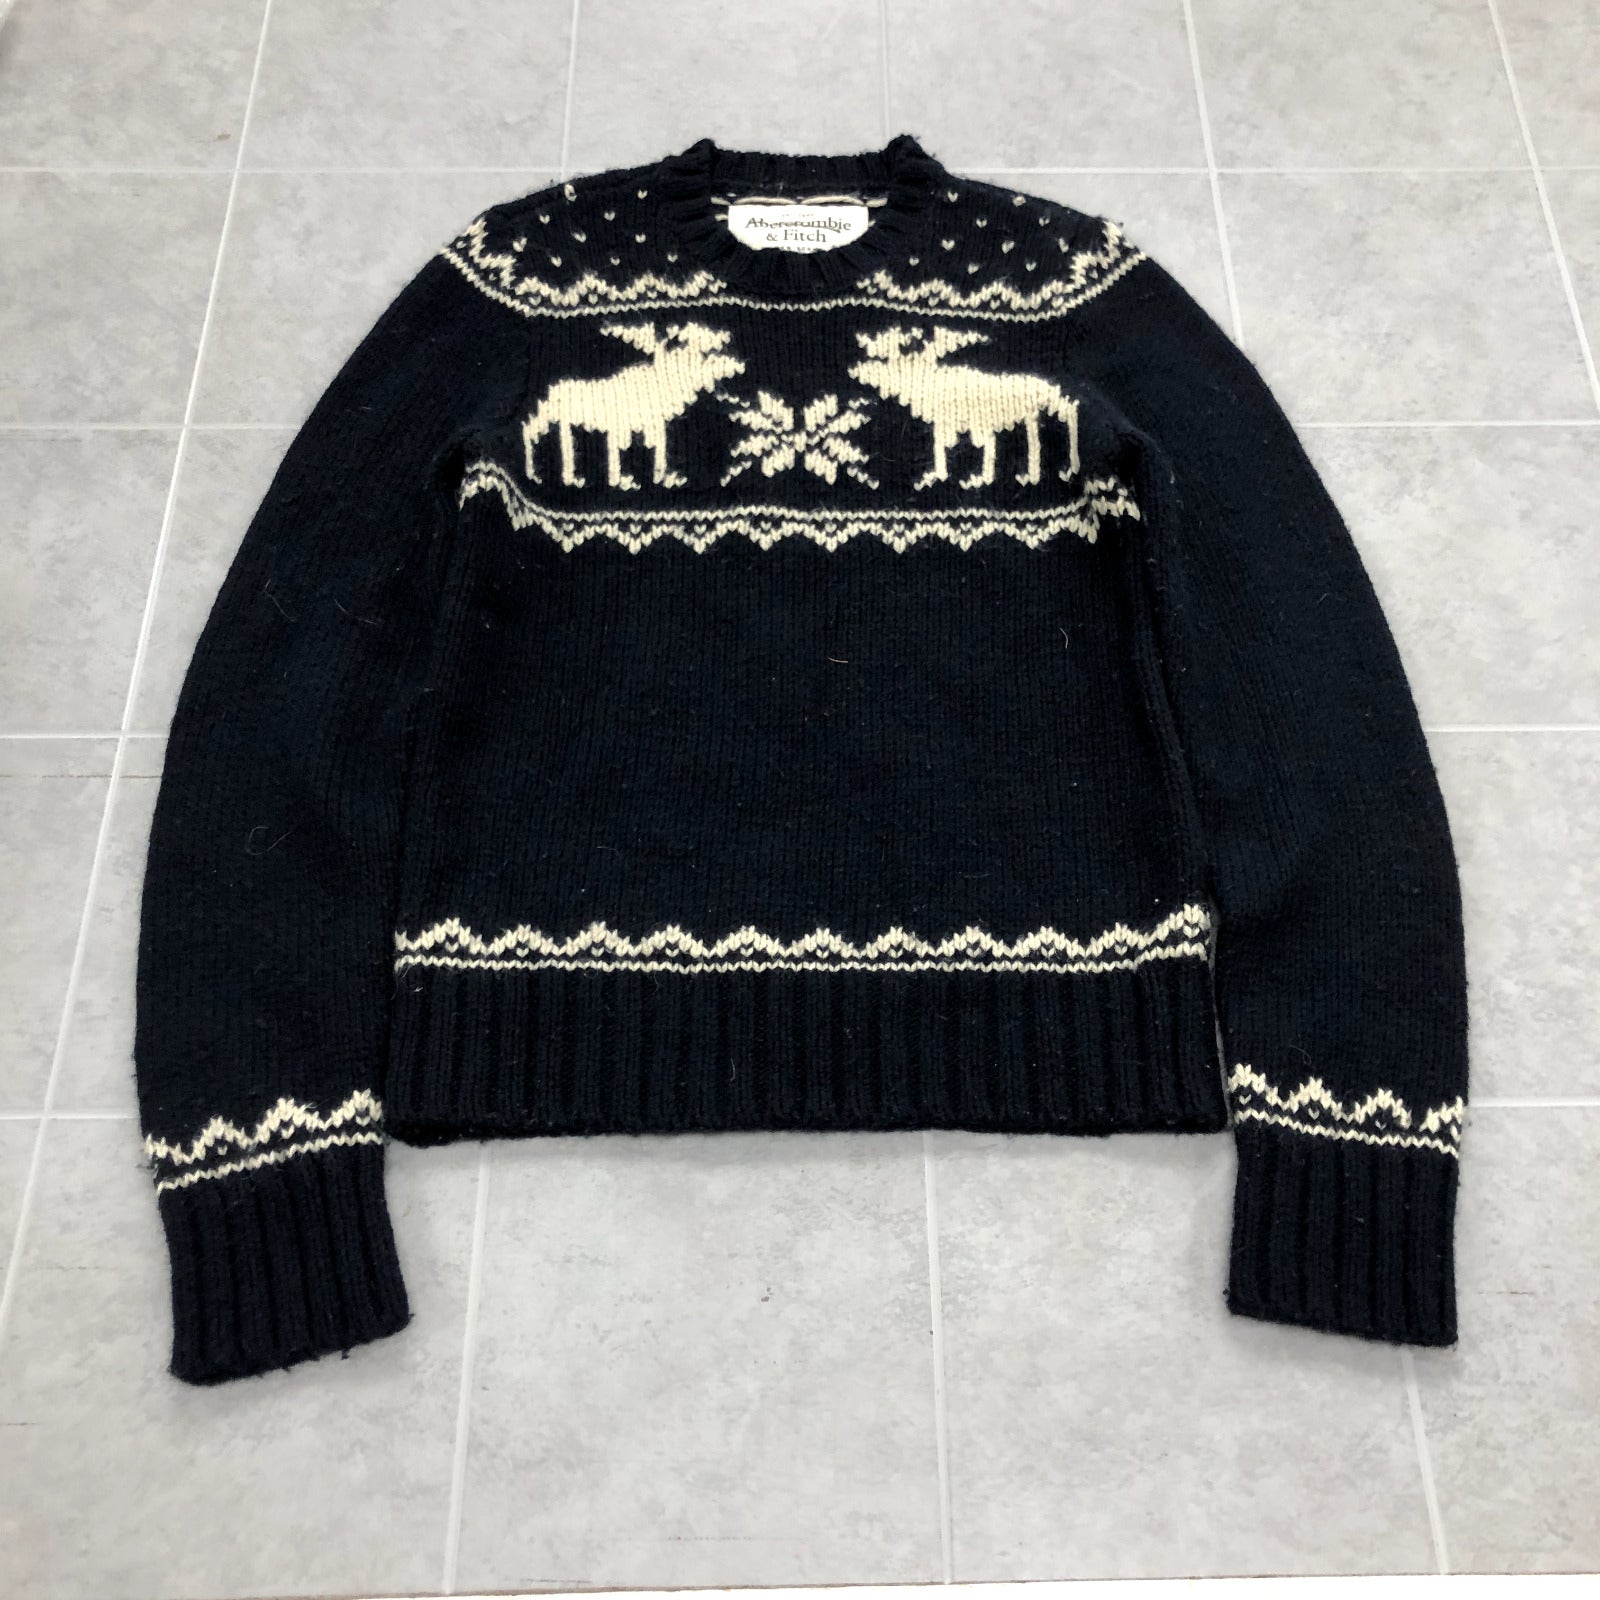 Abercrombie & Fitch Navy Blue Long Sleeve Holiday Reindeer Sweater Adult Size S